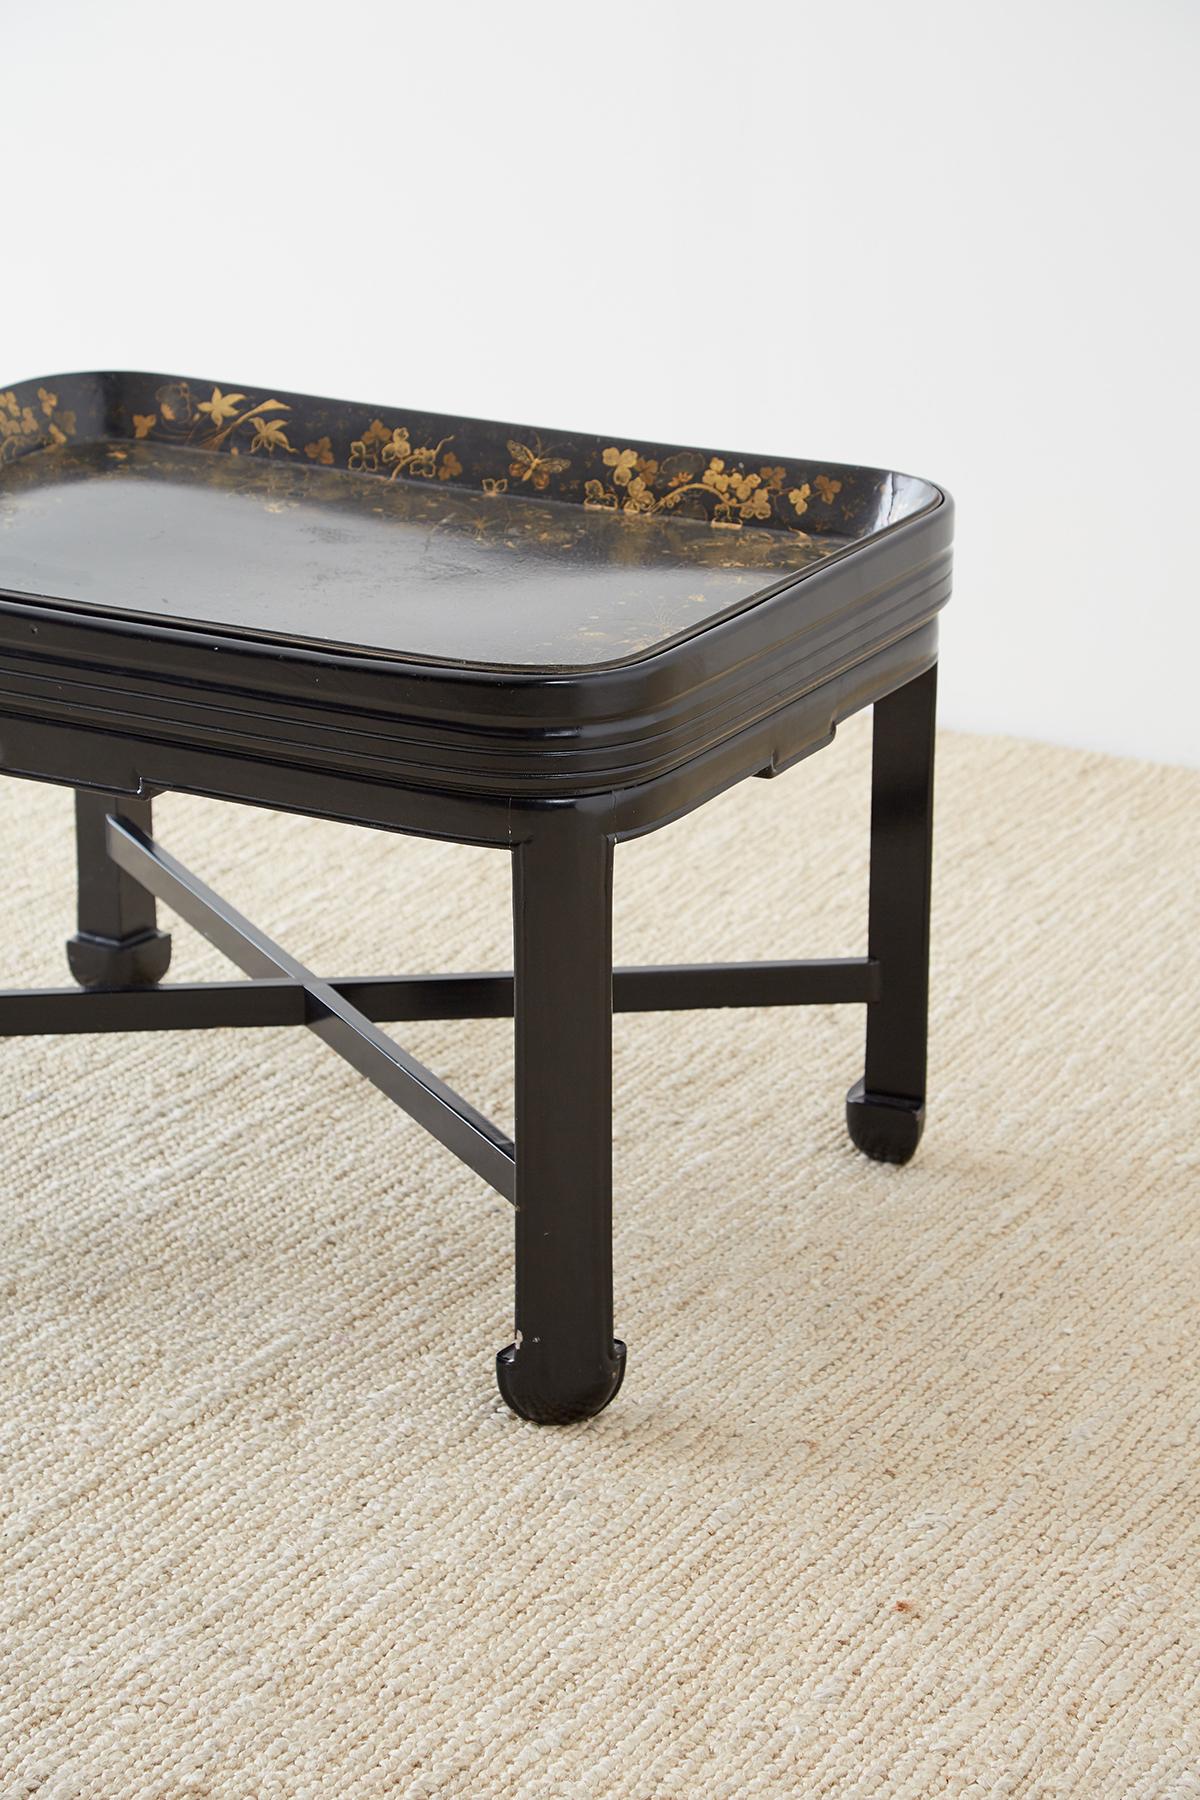 19th Century English Chinoiserie Lacquered Tray Table by Henry Clay